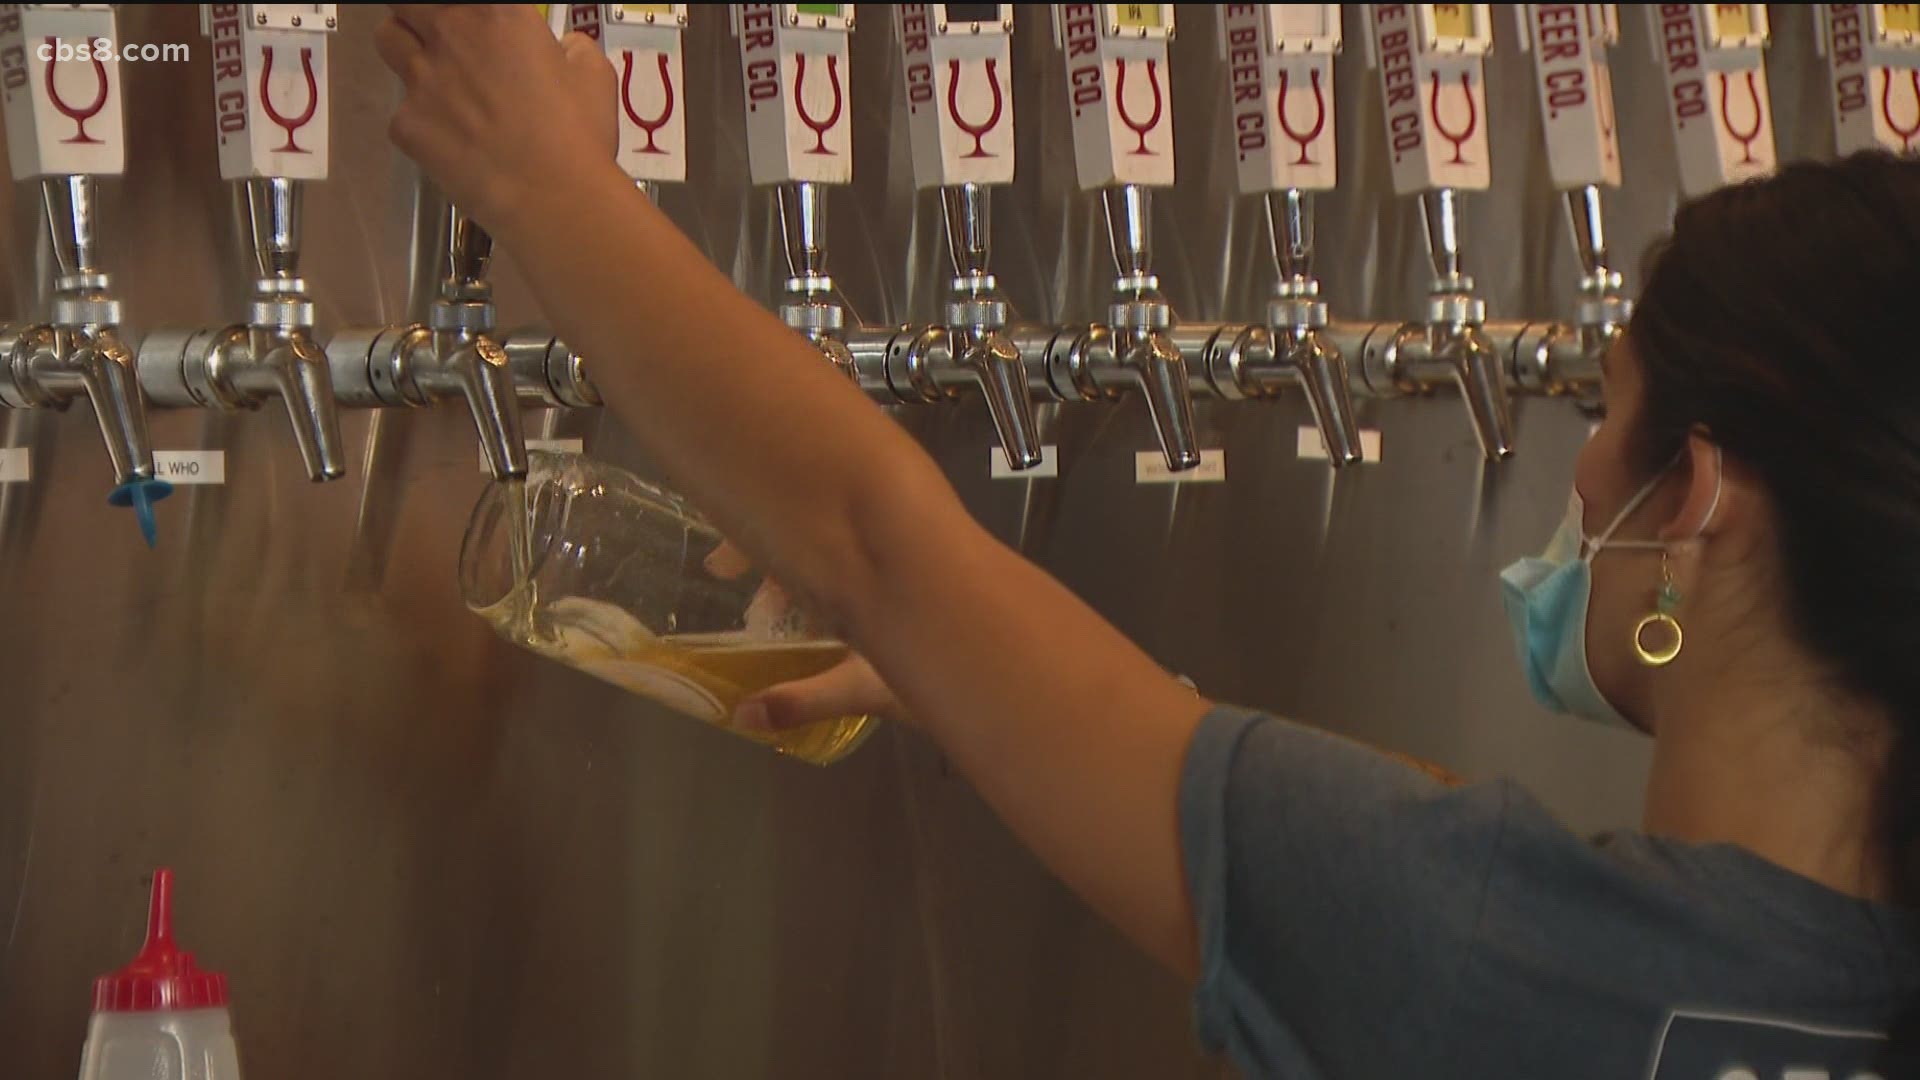 Local breweries have been hit hard in the last year, adapting by canning their beer but they had a lot to celebrate on National Beer Day.